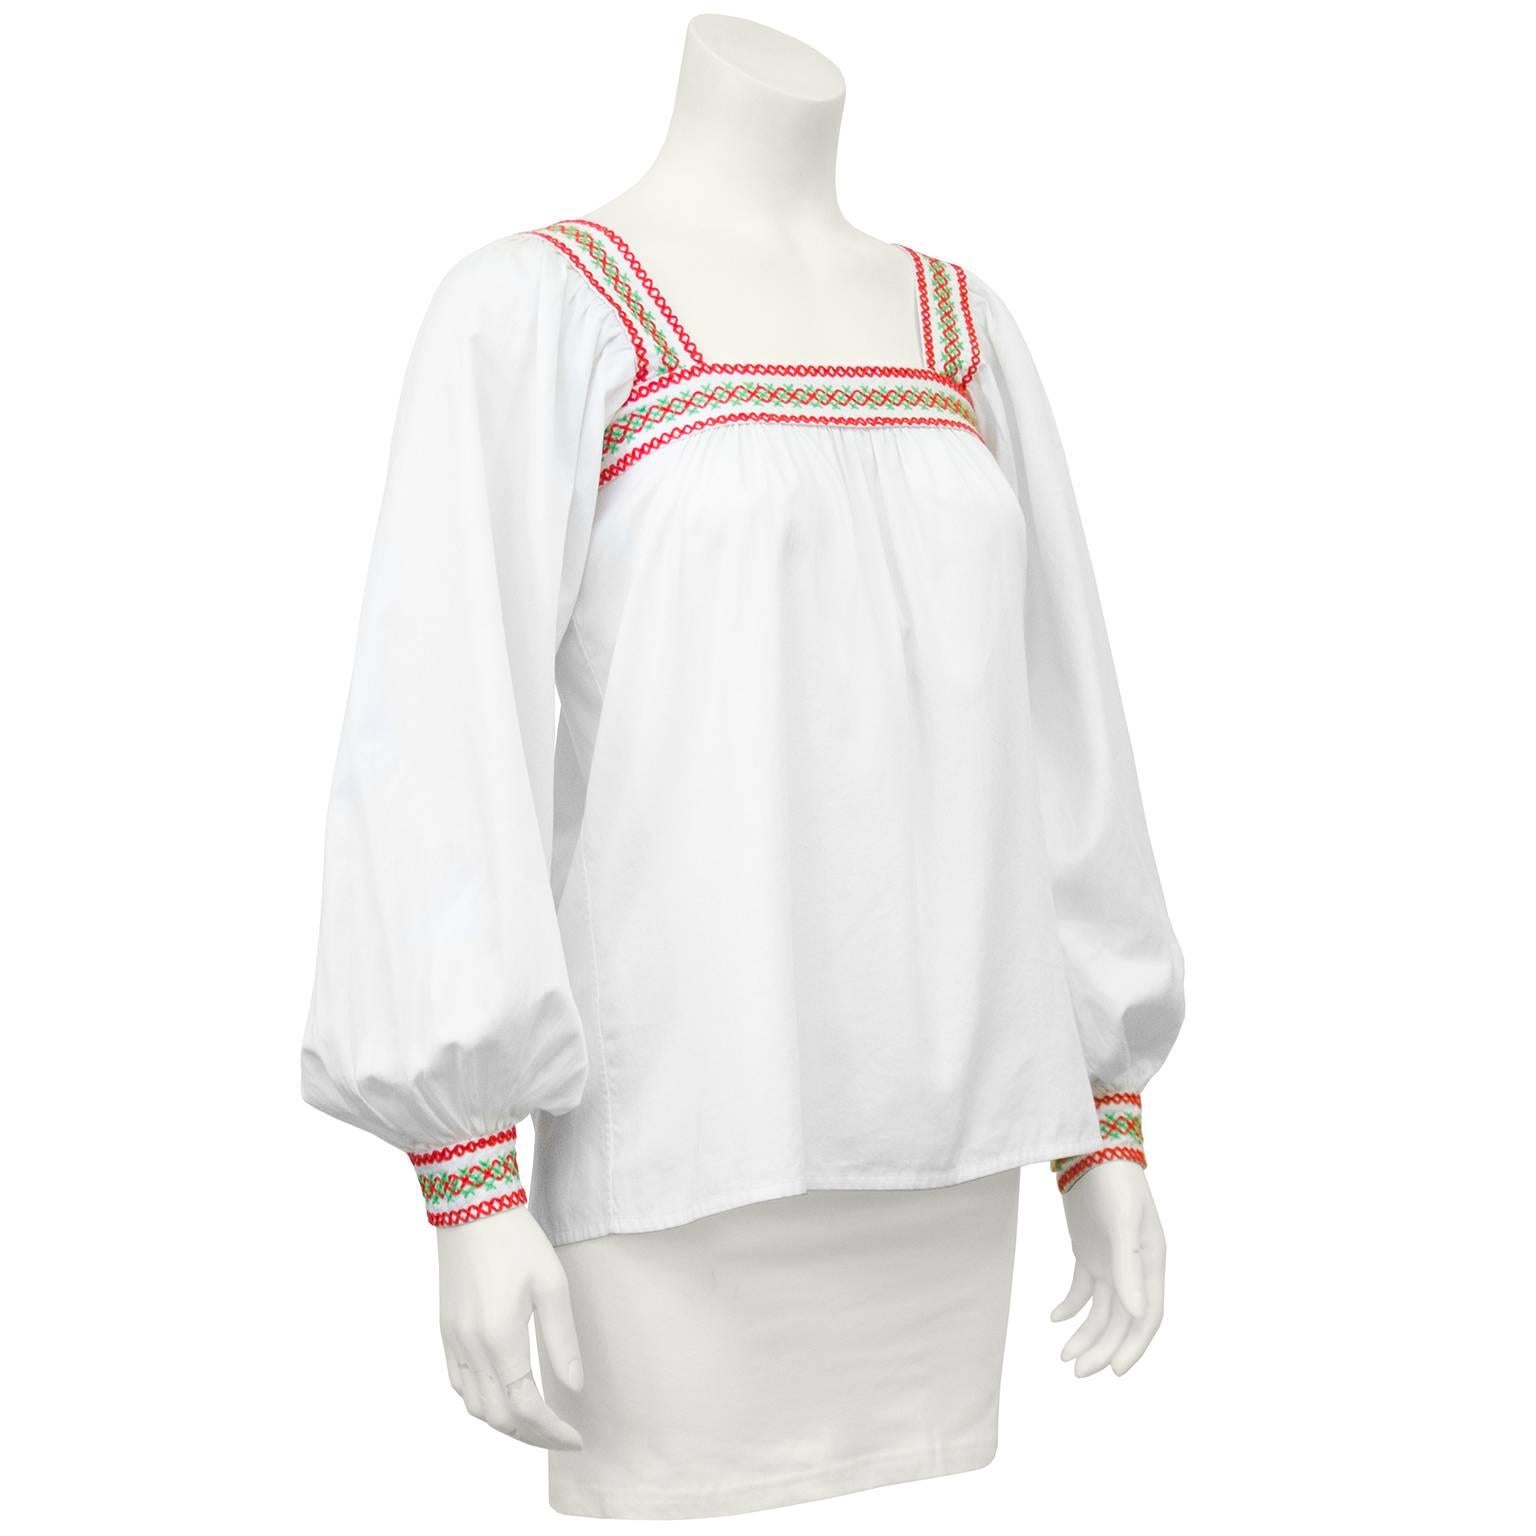 YSL white cotton peasant style top accented at the neckline and cuffs with hand stitched smocking. Dating from the late 1970s this is a great example of the famous peasant collection that is now regarded as one of  Saint Laurent’s most desirable. In